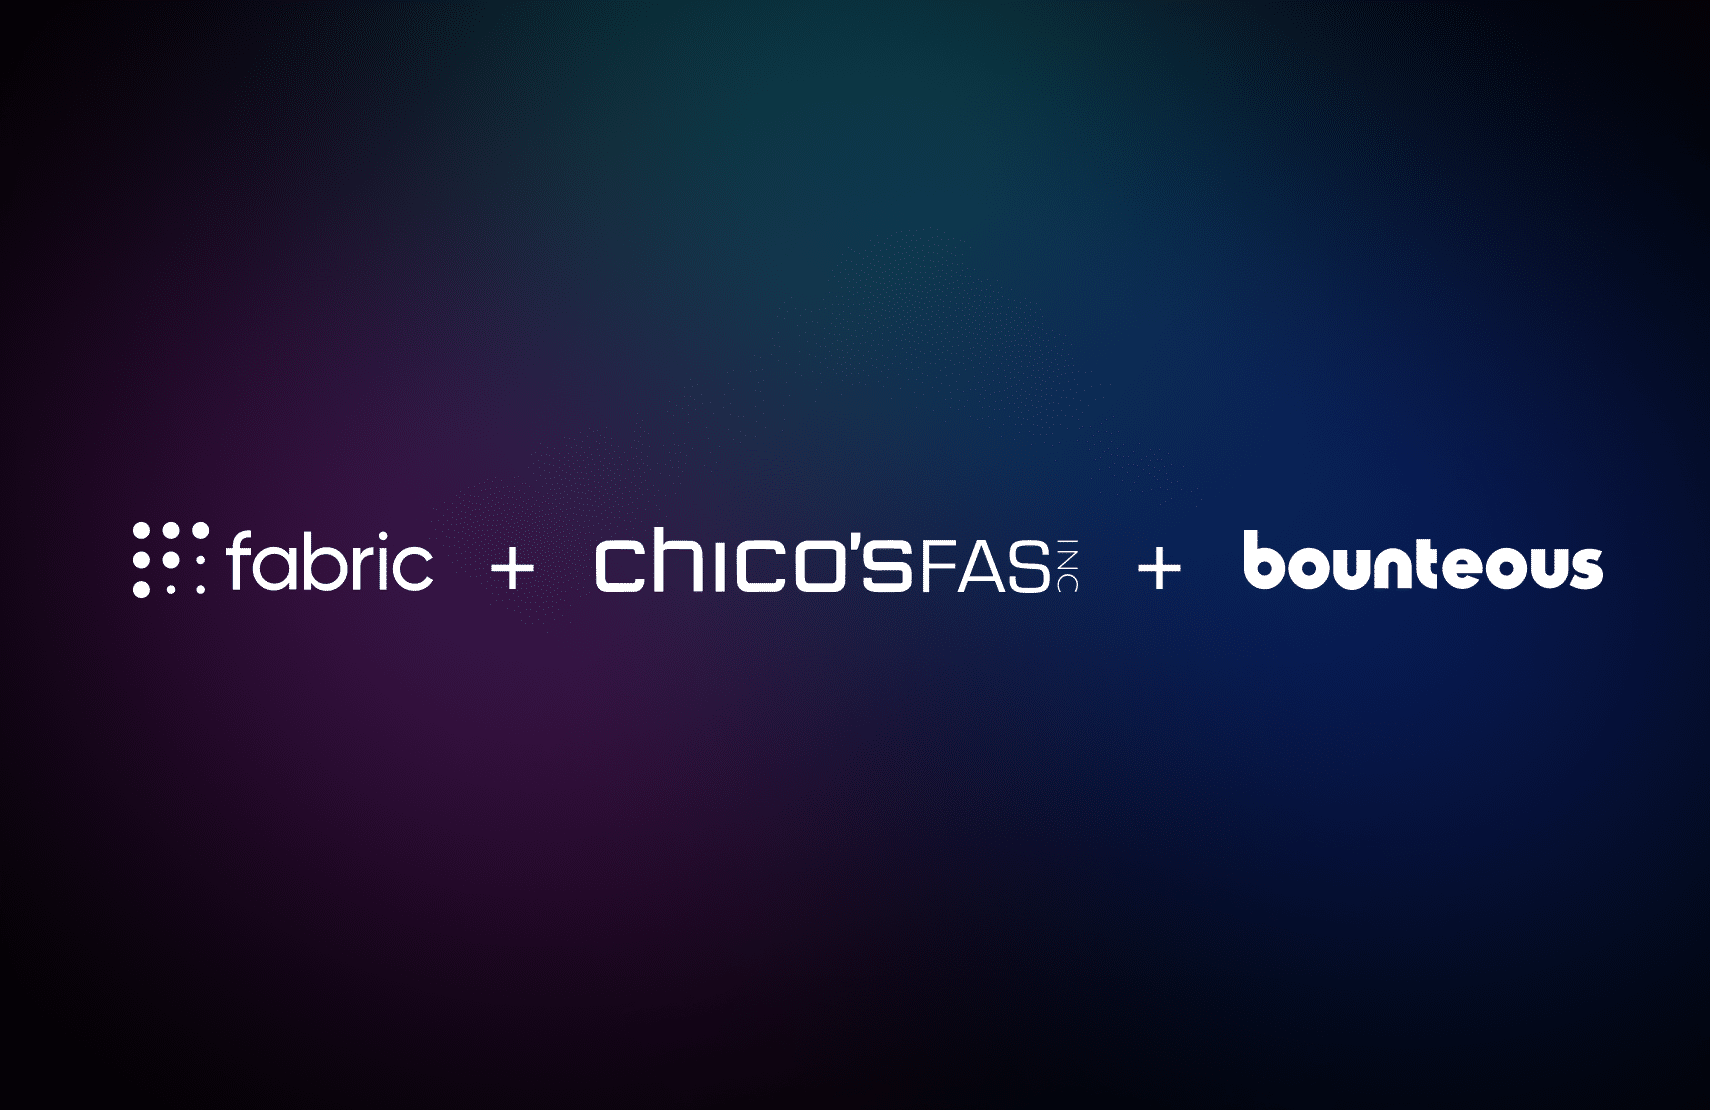 Chico's FAS, Inc. Announces Innovation-Driven Partnership with fabric